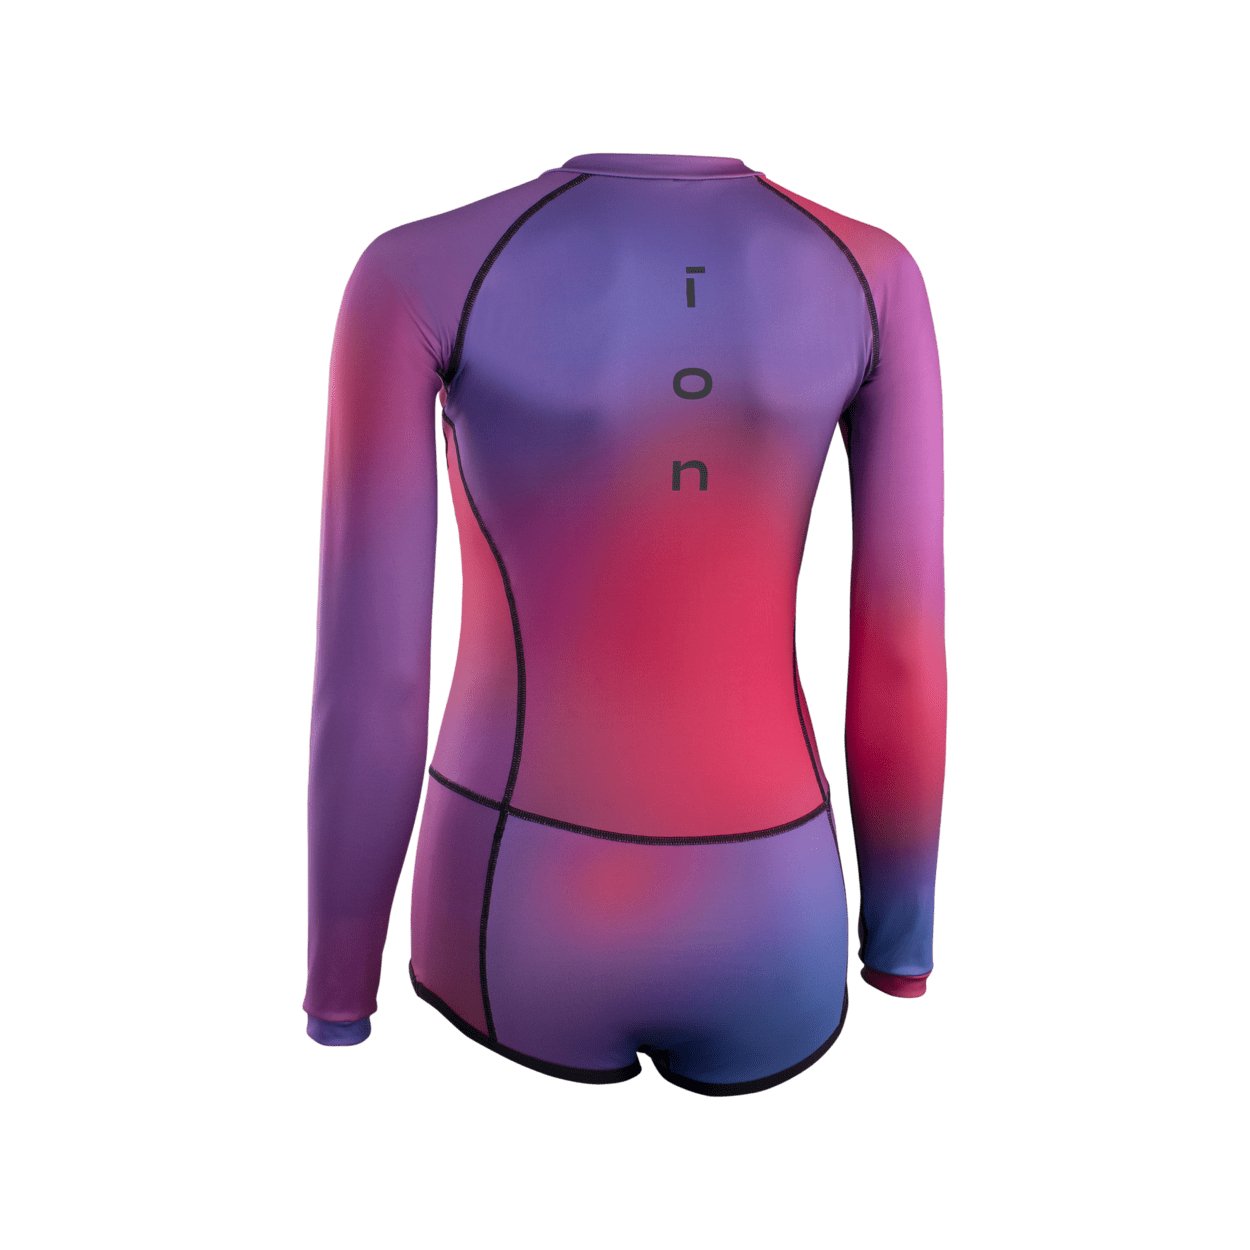 ION Swimsuit LS 2023 - Worthing Watersports - 9010583118246 - Tops - ION Water